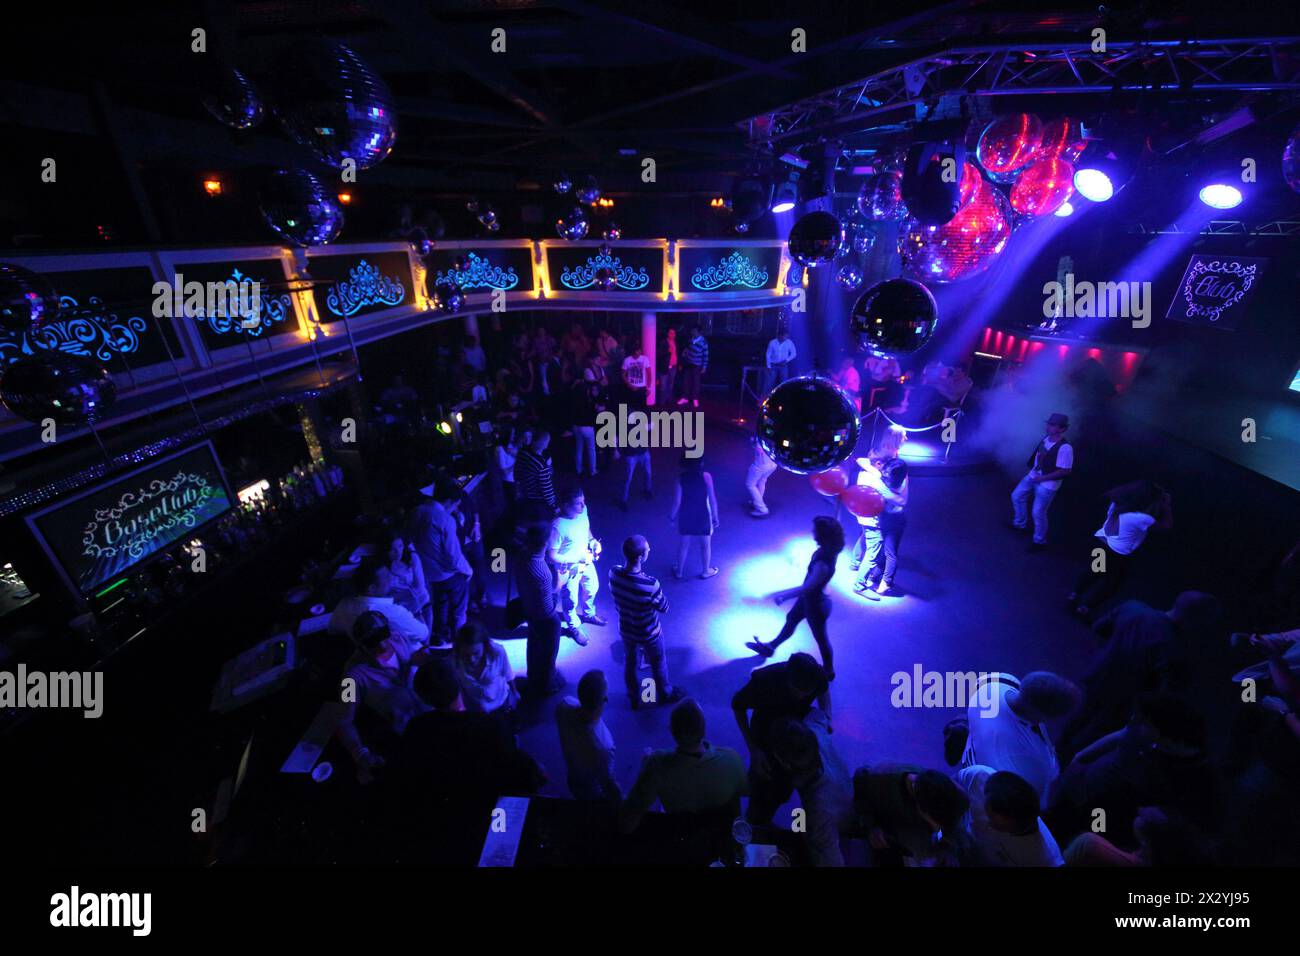 MOSCOW - SEP 21: The people on the dance floor of the nightclub Base on September 21, 2012 in Moscow, Russia. Stock Photo